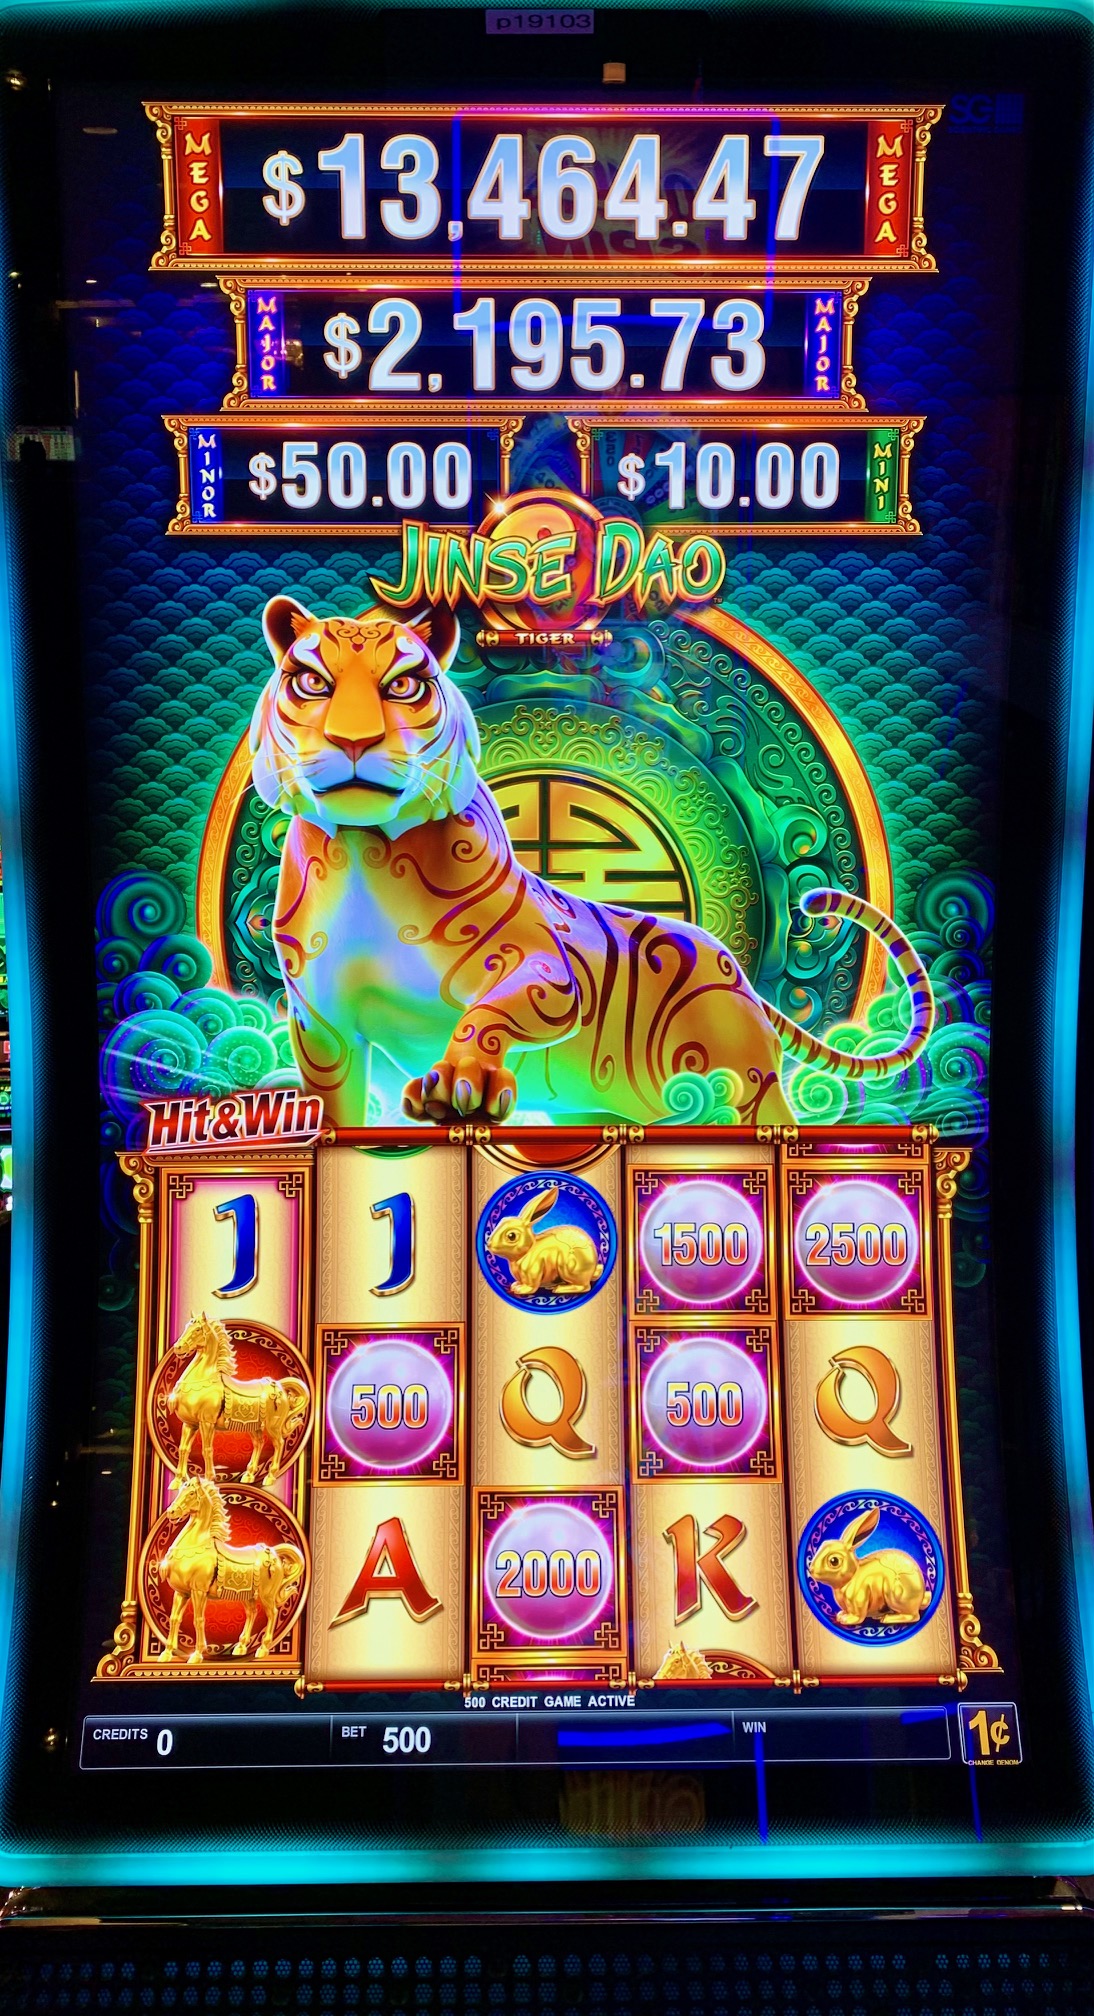 Grand FU is one of the best slot machines